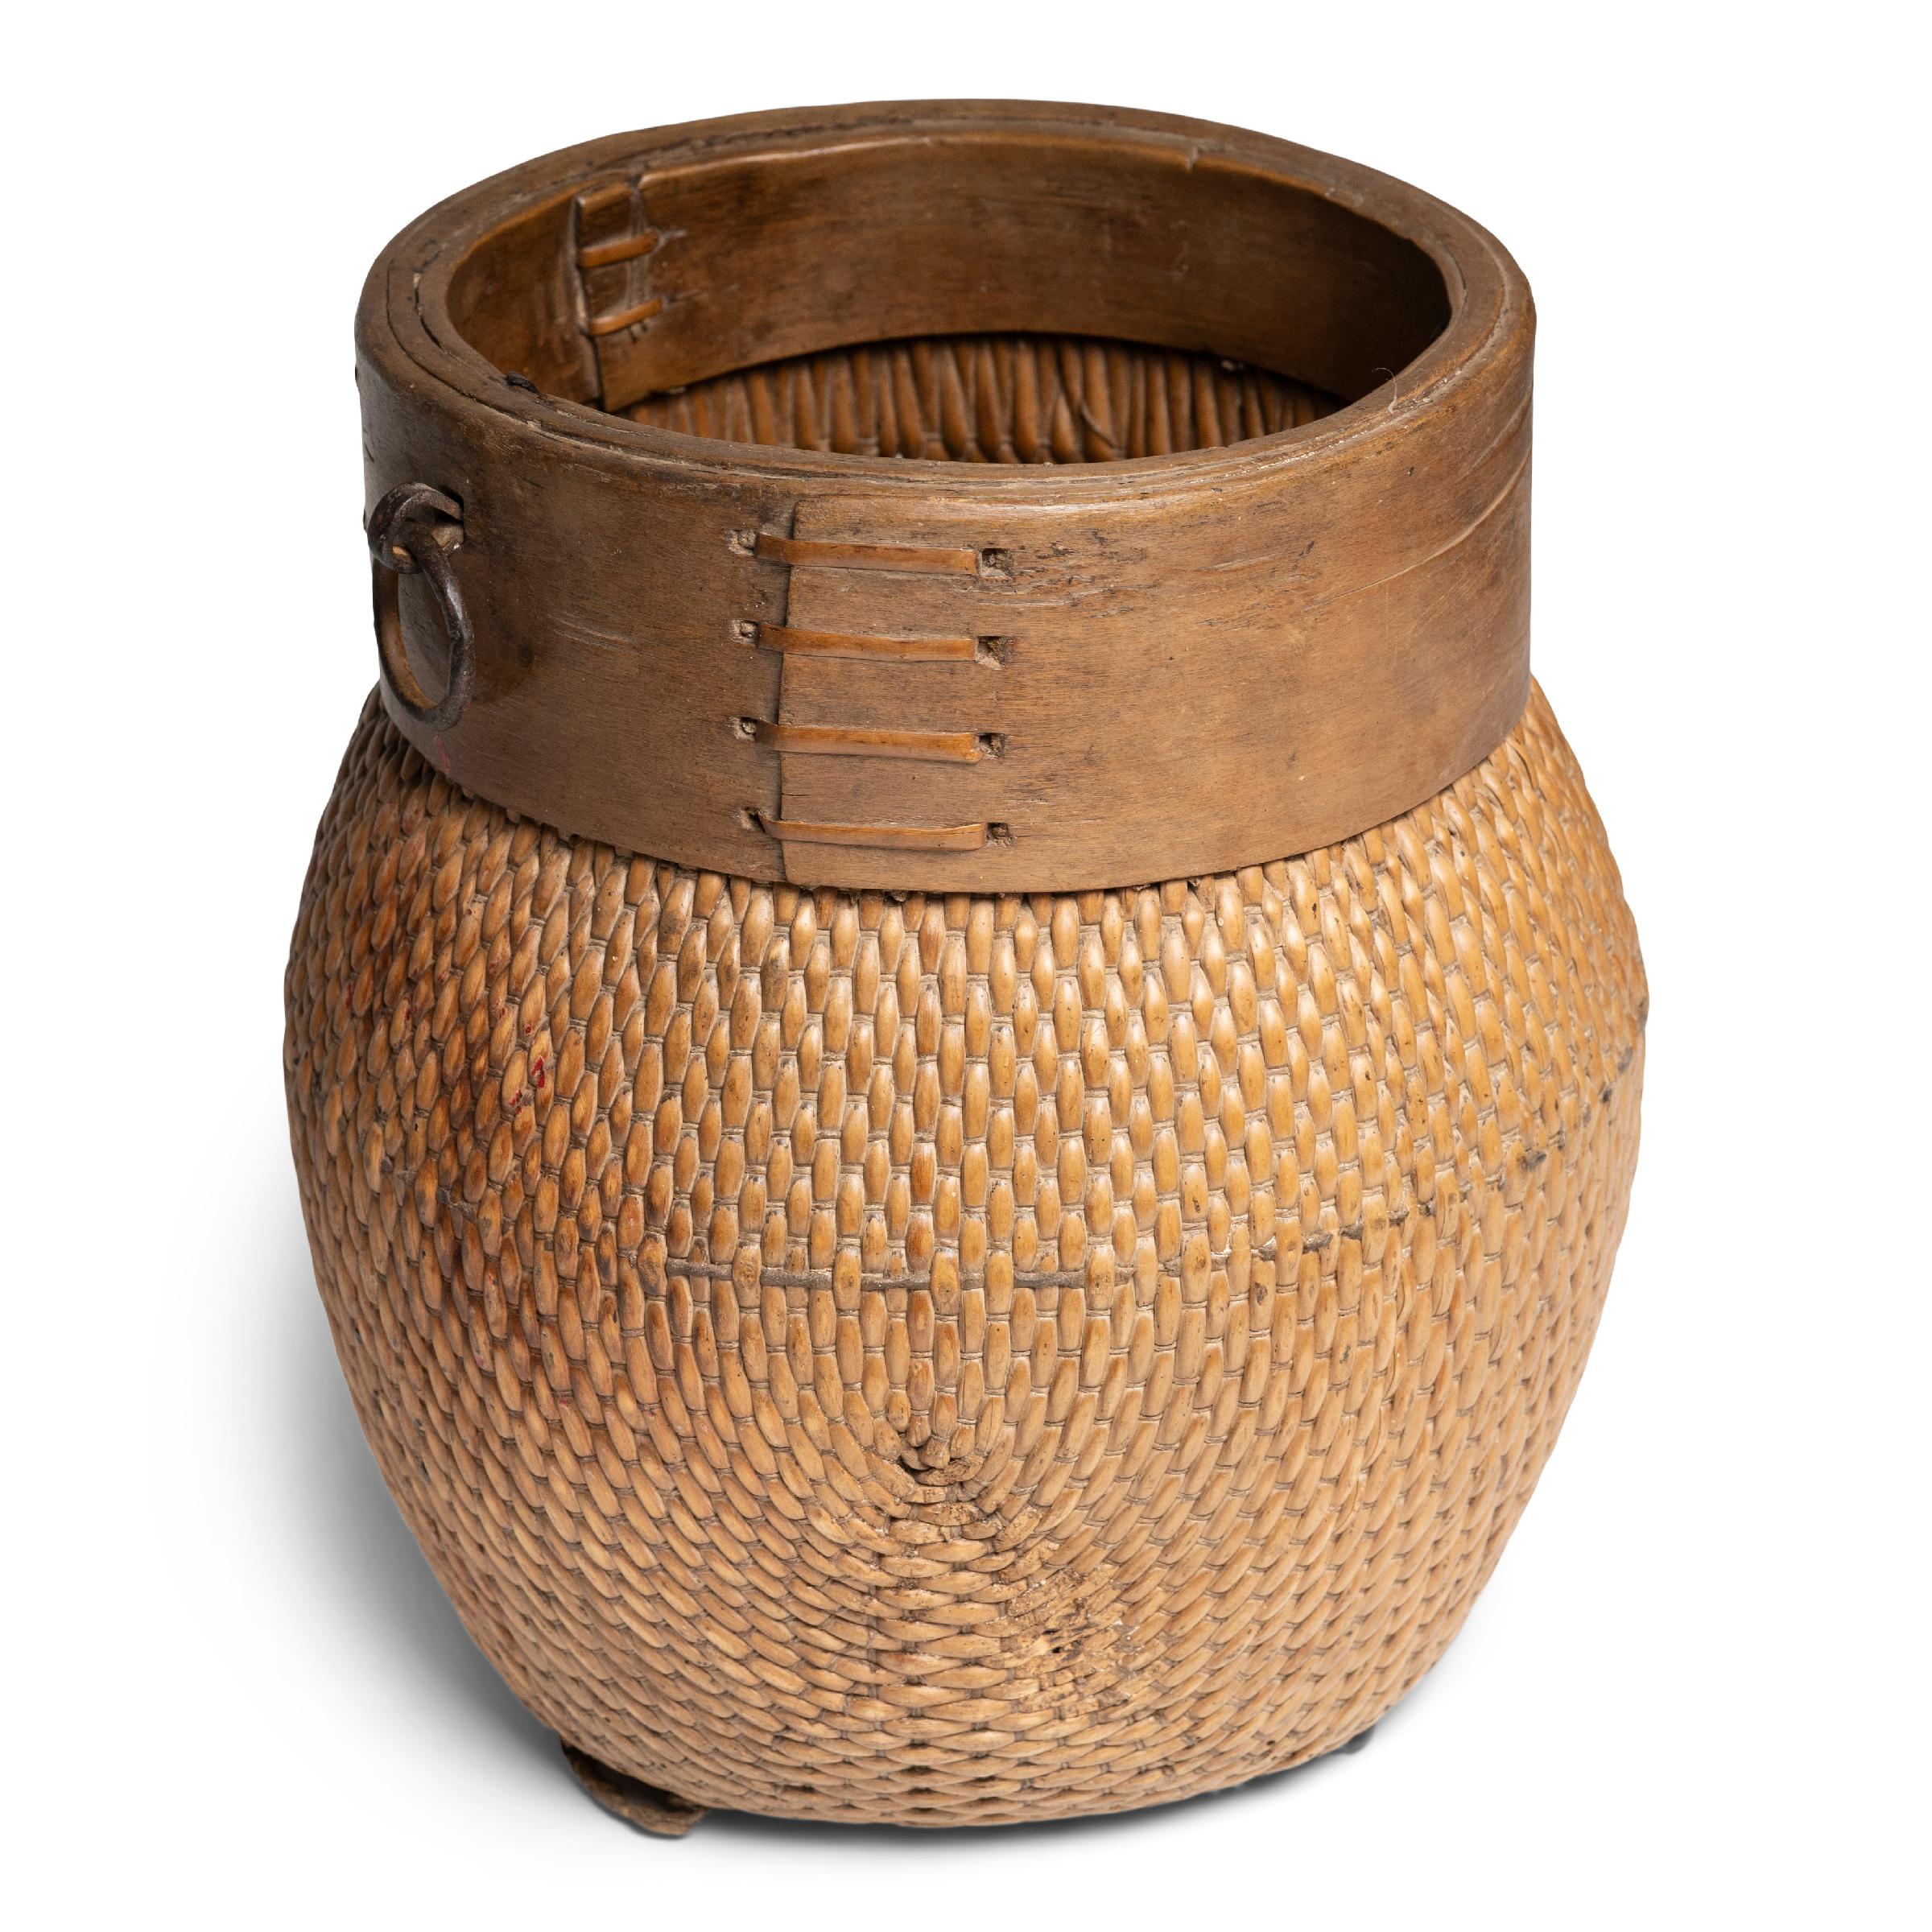 Rustic Chinese Woven River Basket, circa 1900